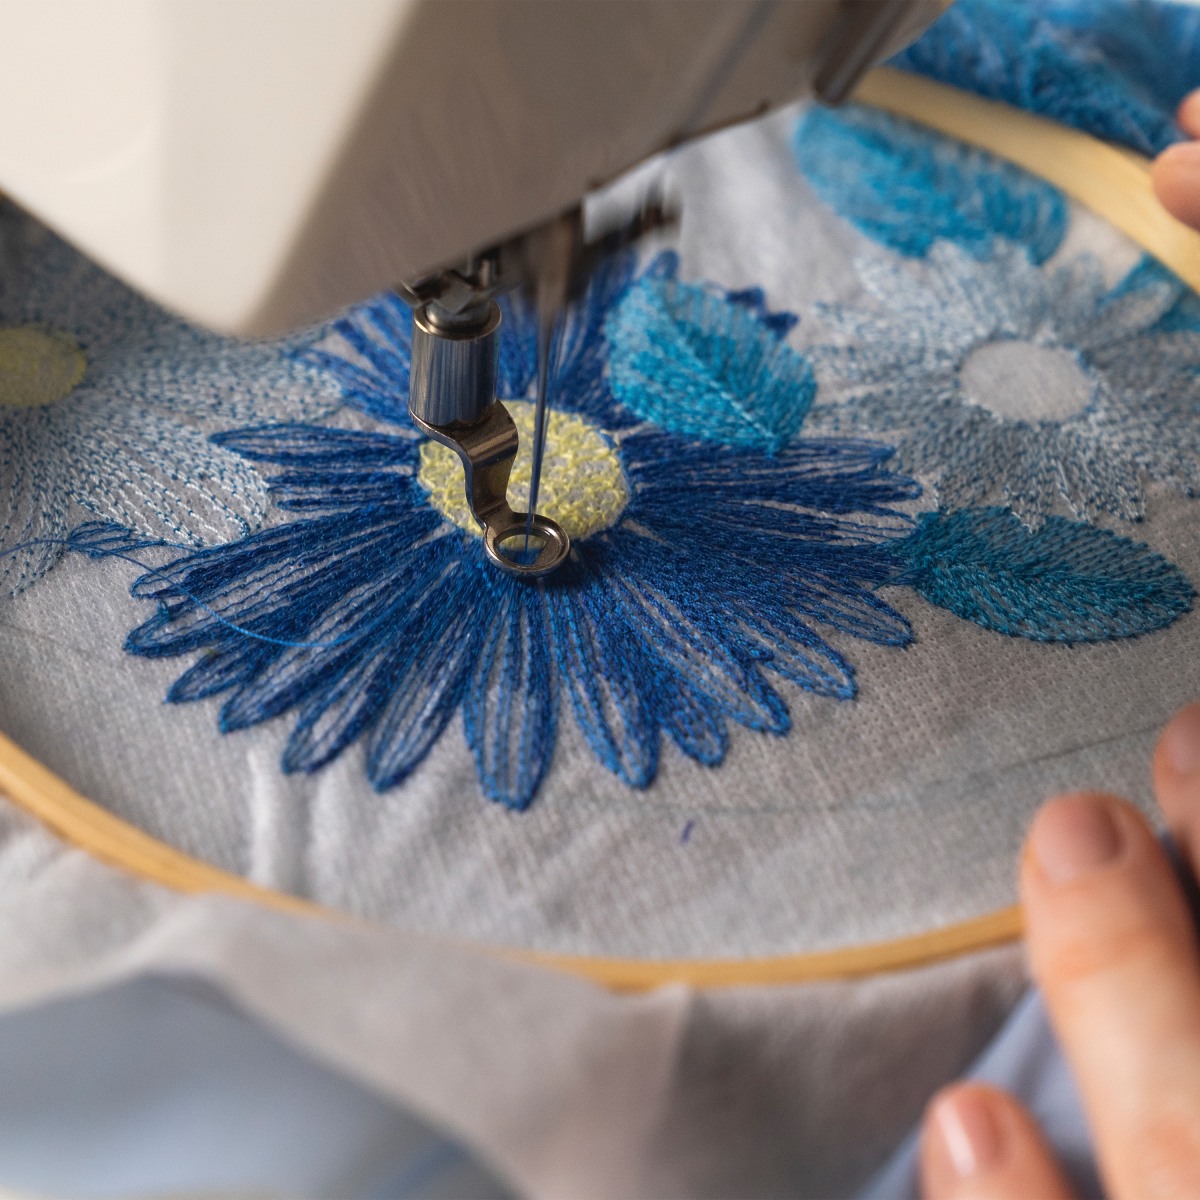 Embroidery Stitches: Master Embroidery with These Essential Techniques